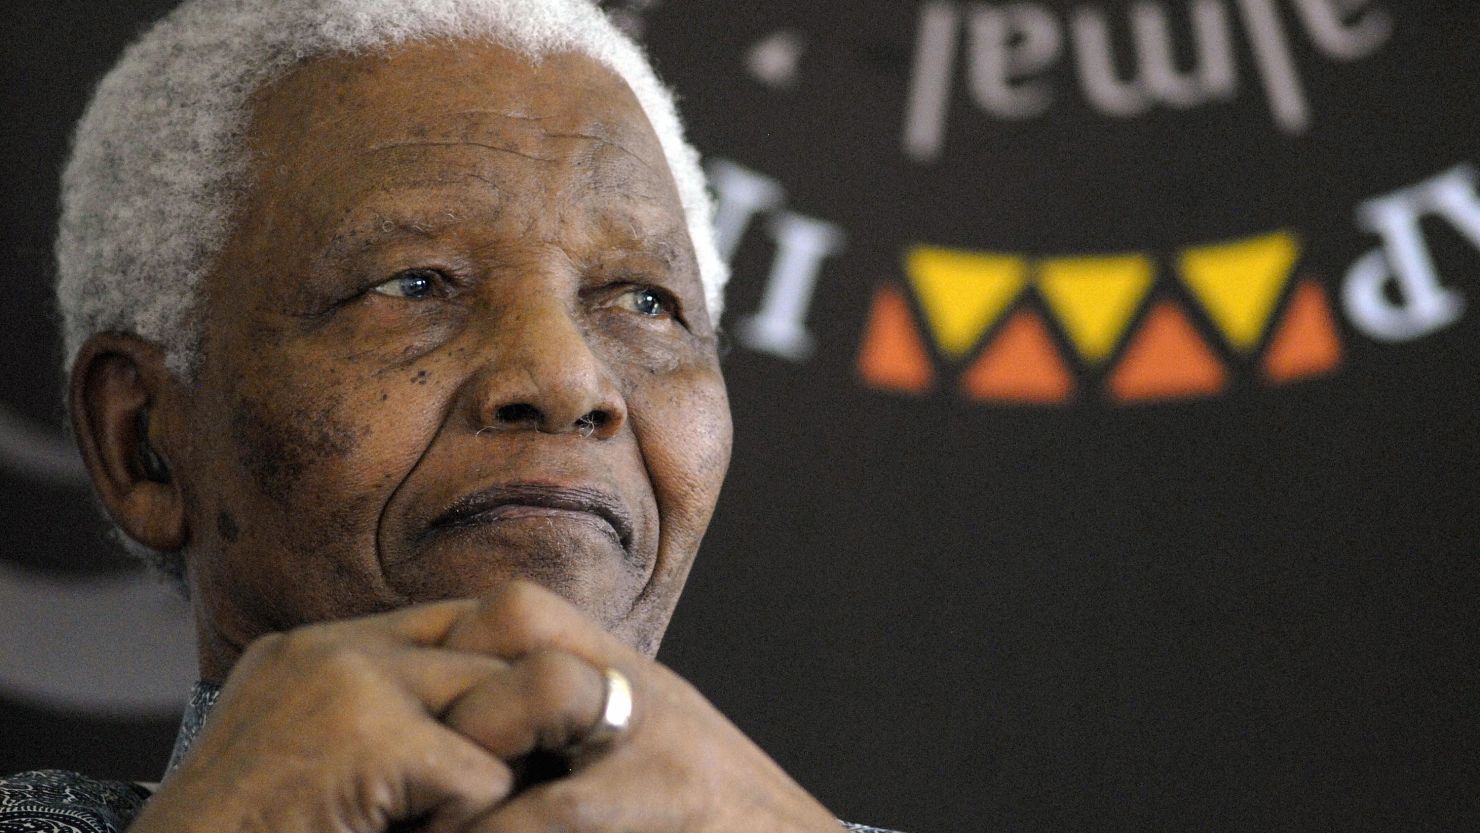 Nelson Mandela has been hospitalized three times in the past five months, most recently for a lung infection in March.